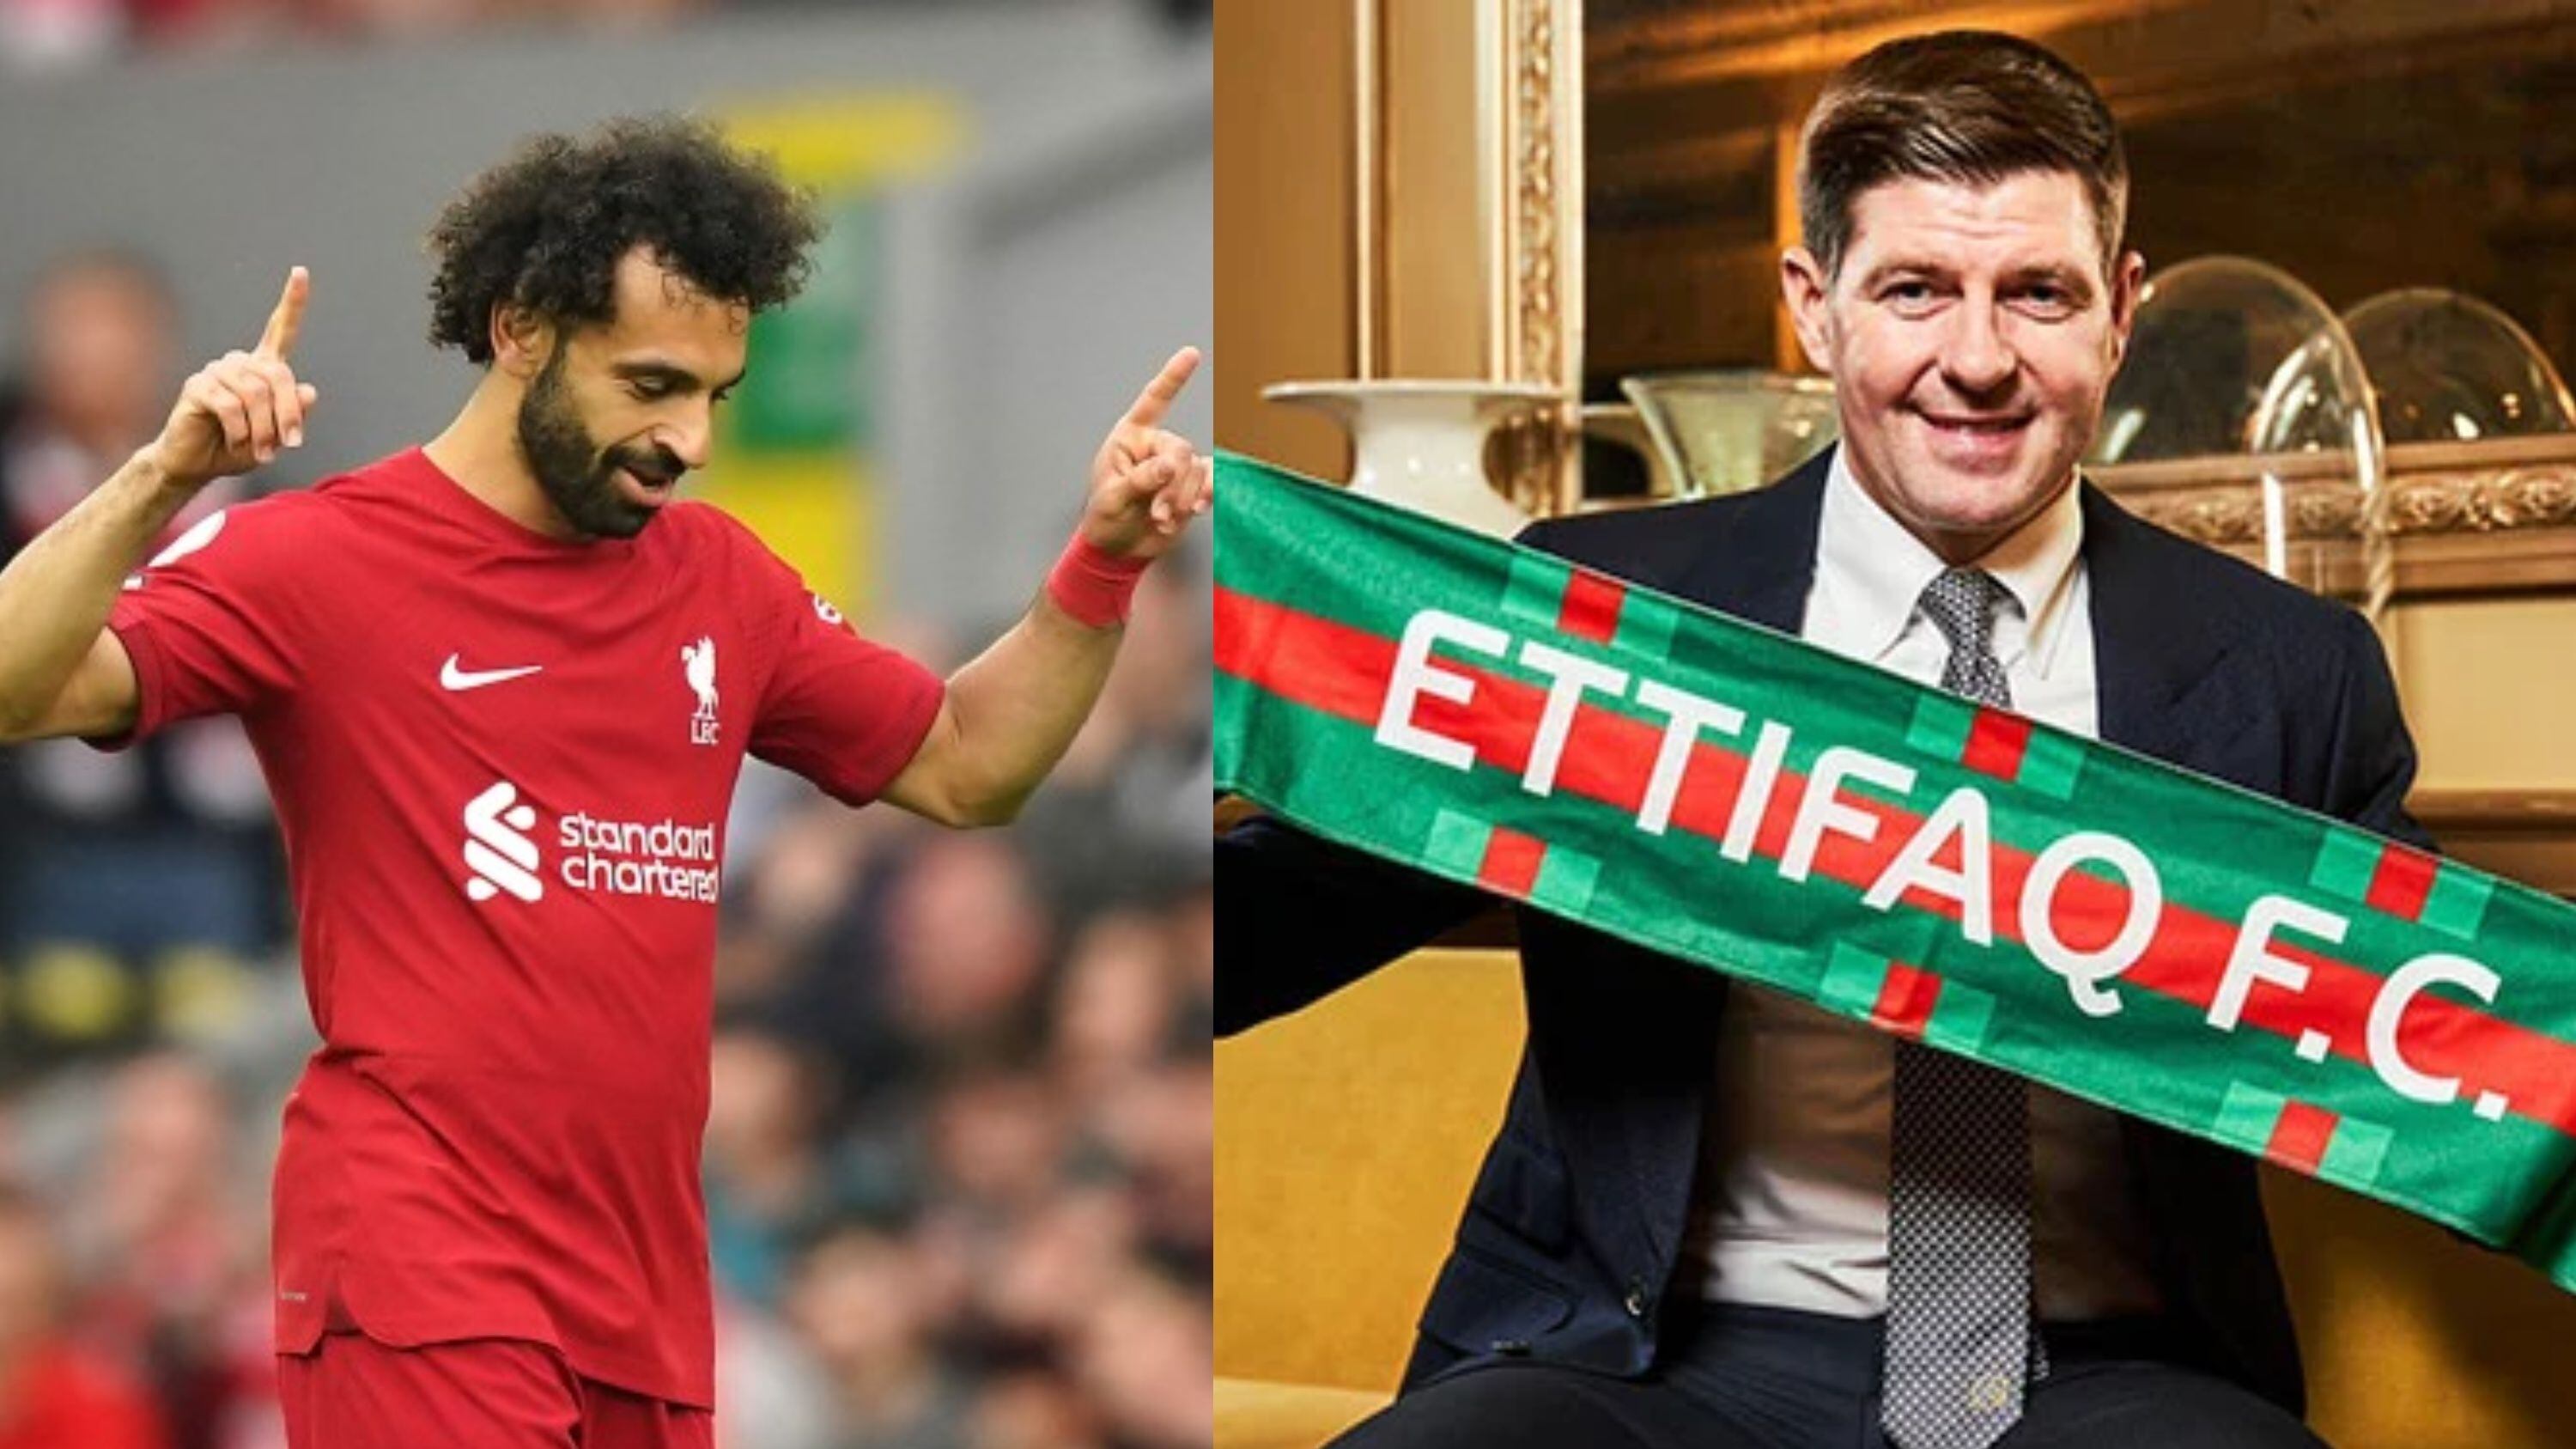 Steven Gerrard rejects Salah's arrival in Arabia, this is what he said about the Egyptian